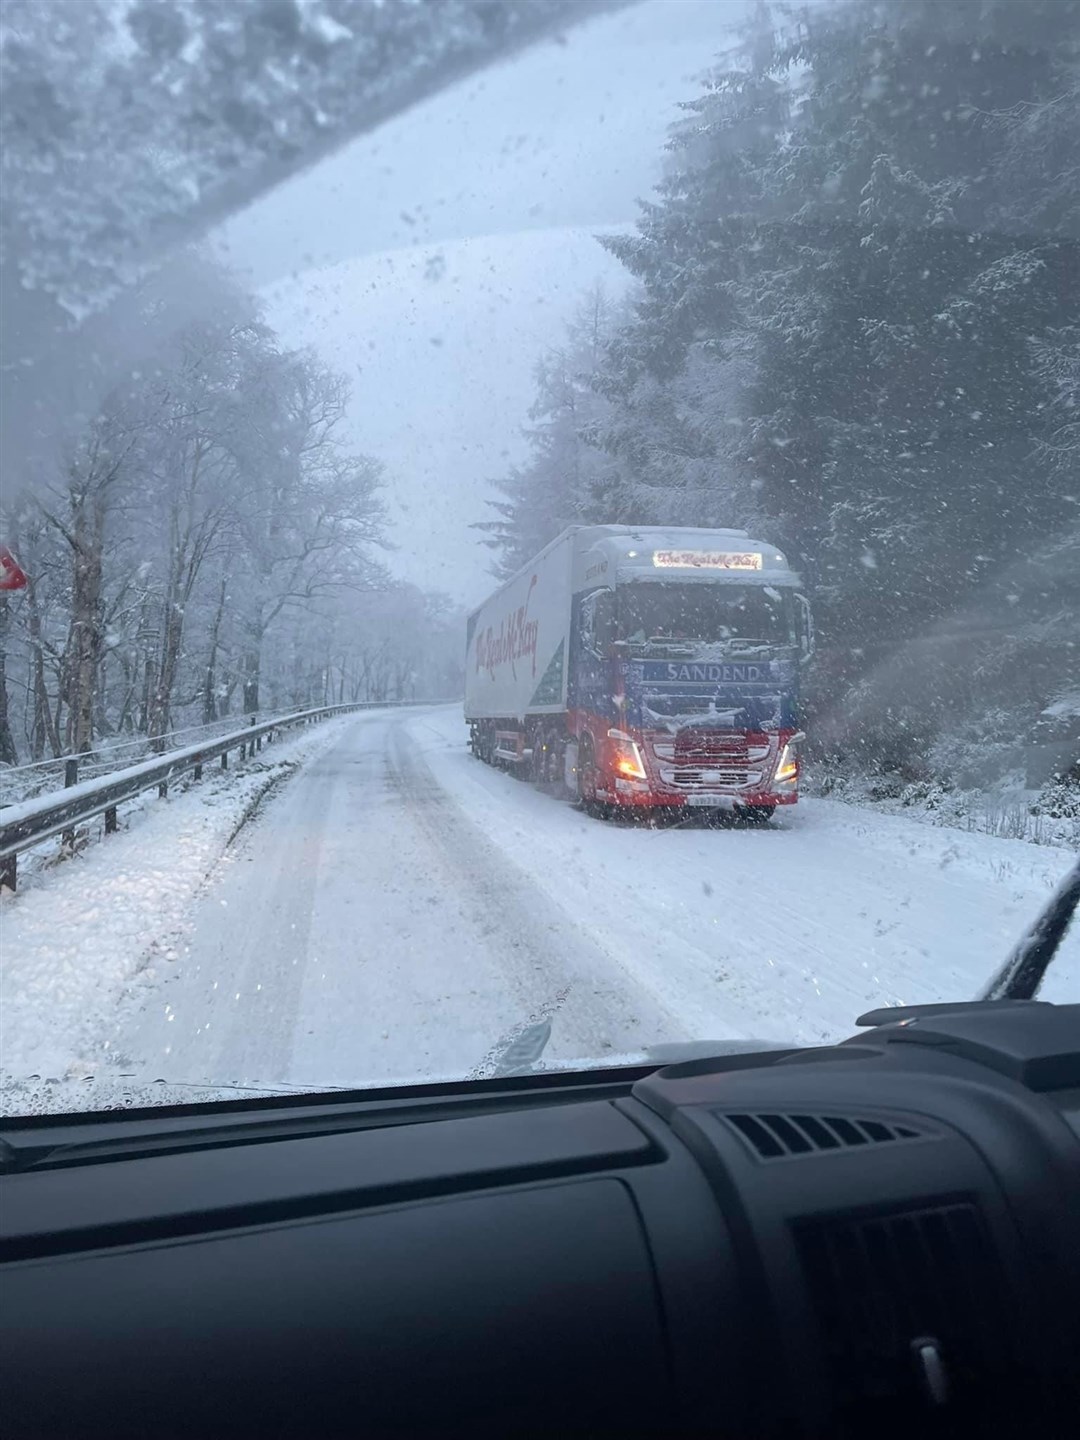 This picture was taken on the A835 yesterday by Fiona Macleod-Chiarini. Conditions on parts of the north-west network remain challenging today.